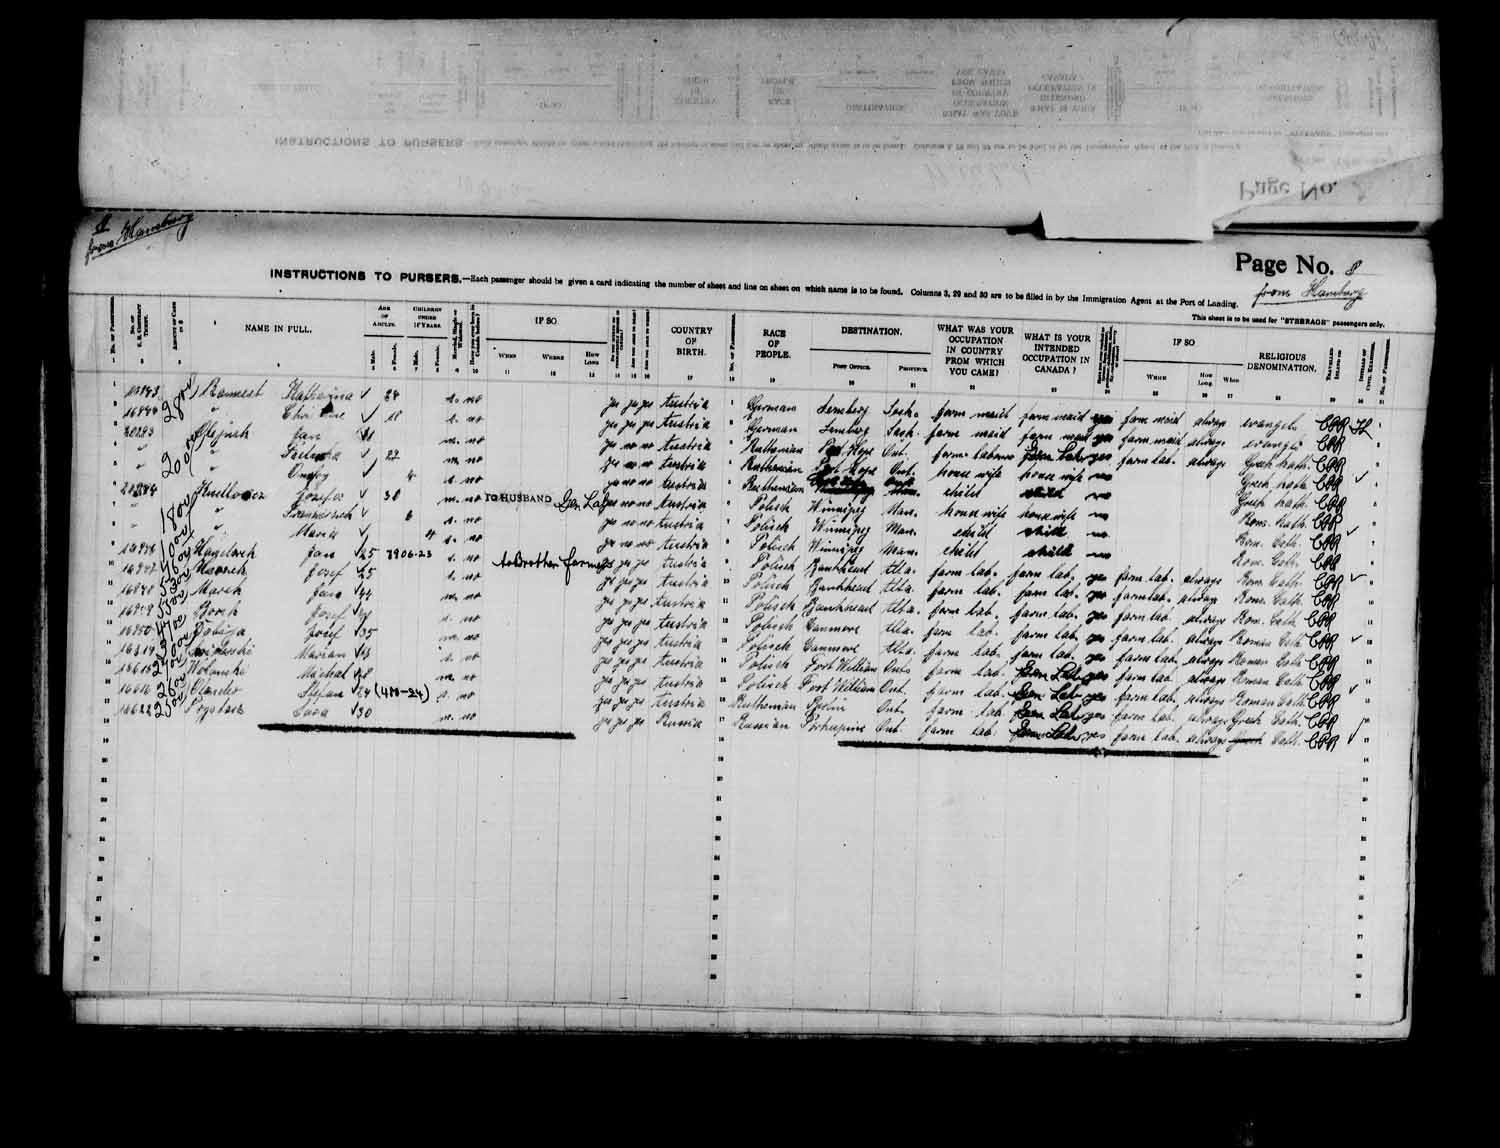 Digitized page of Passenger Lists for Image No.: e003575020